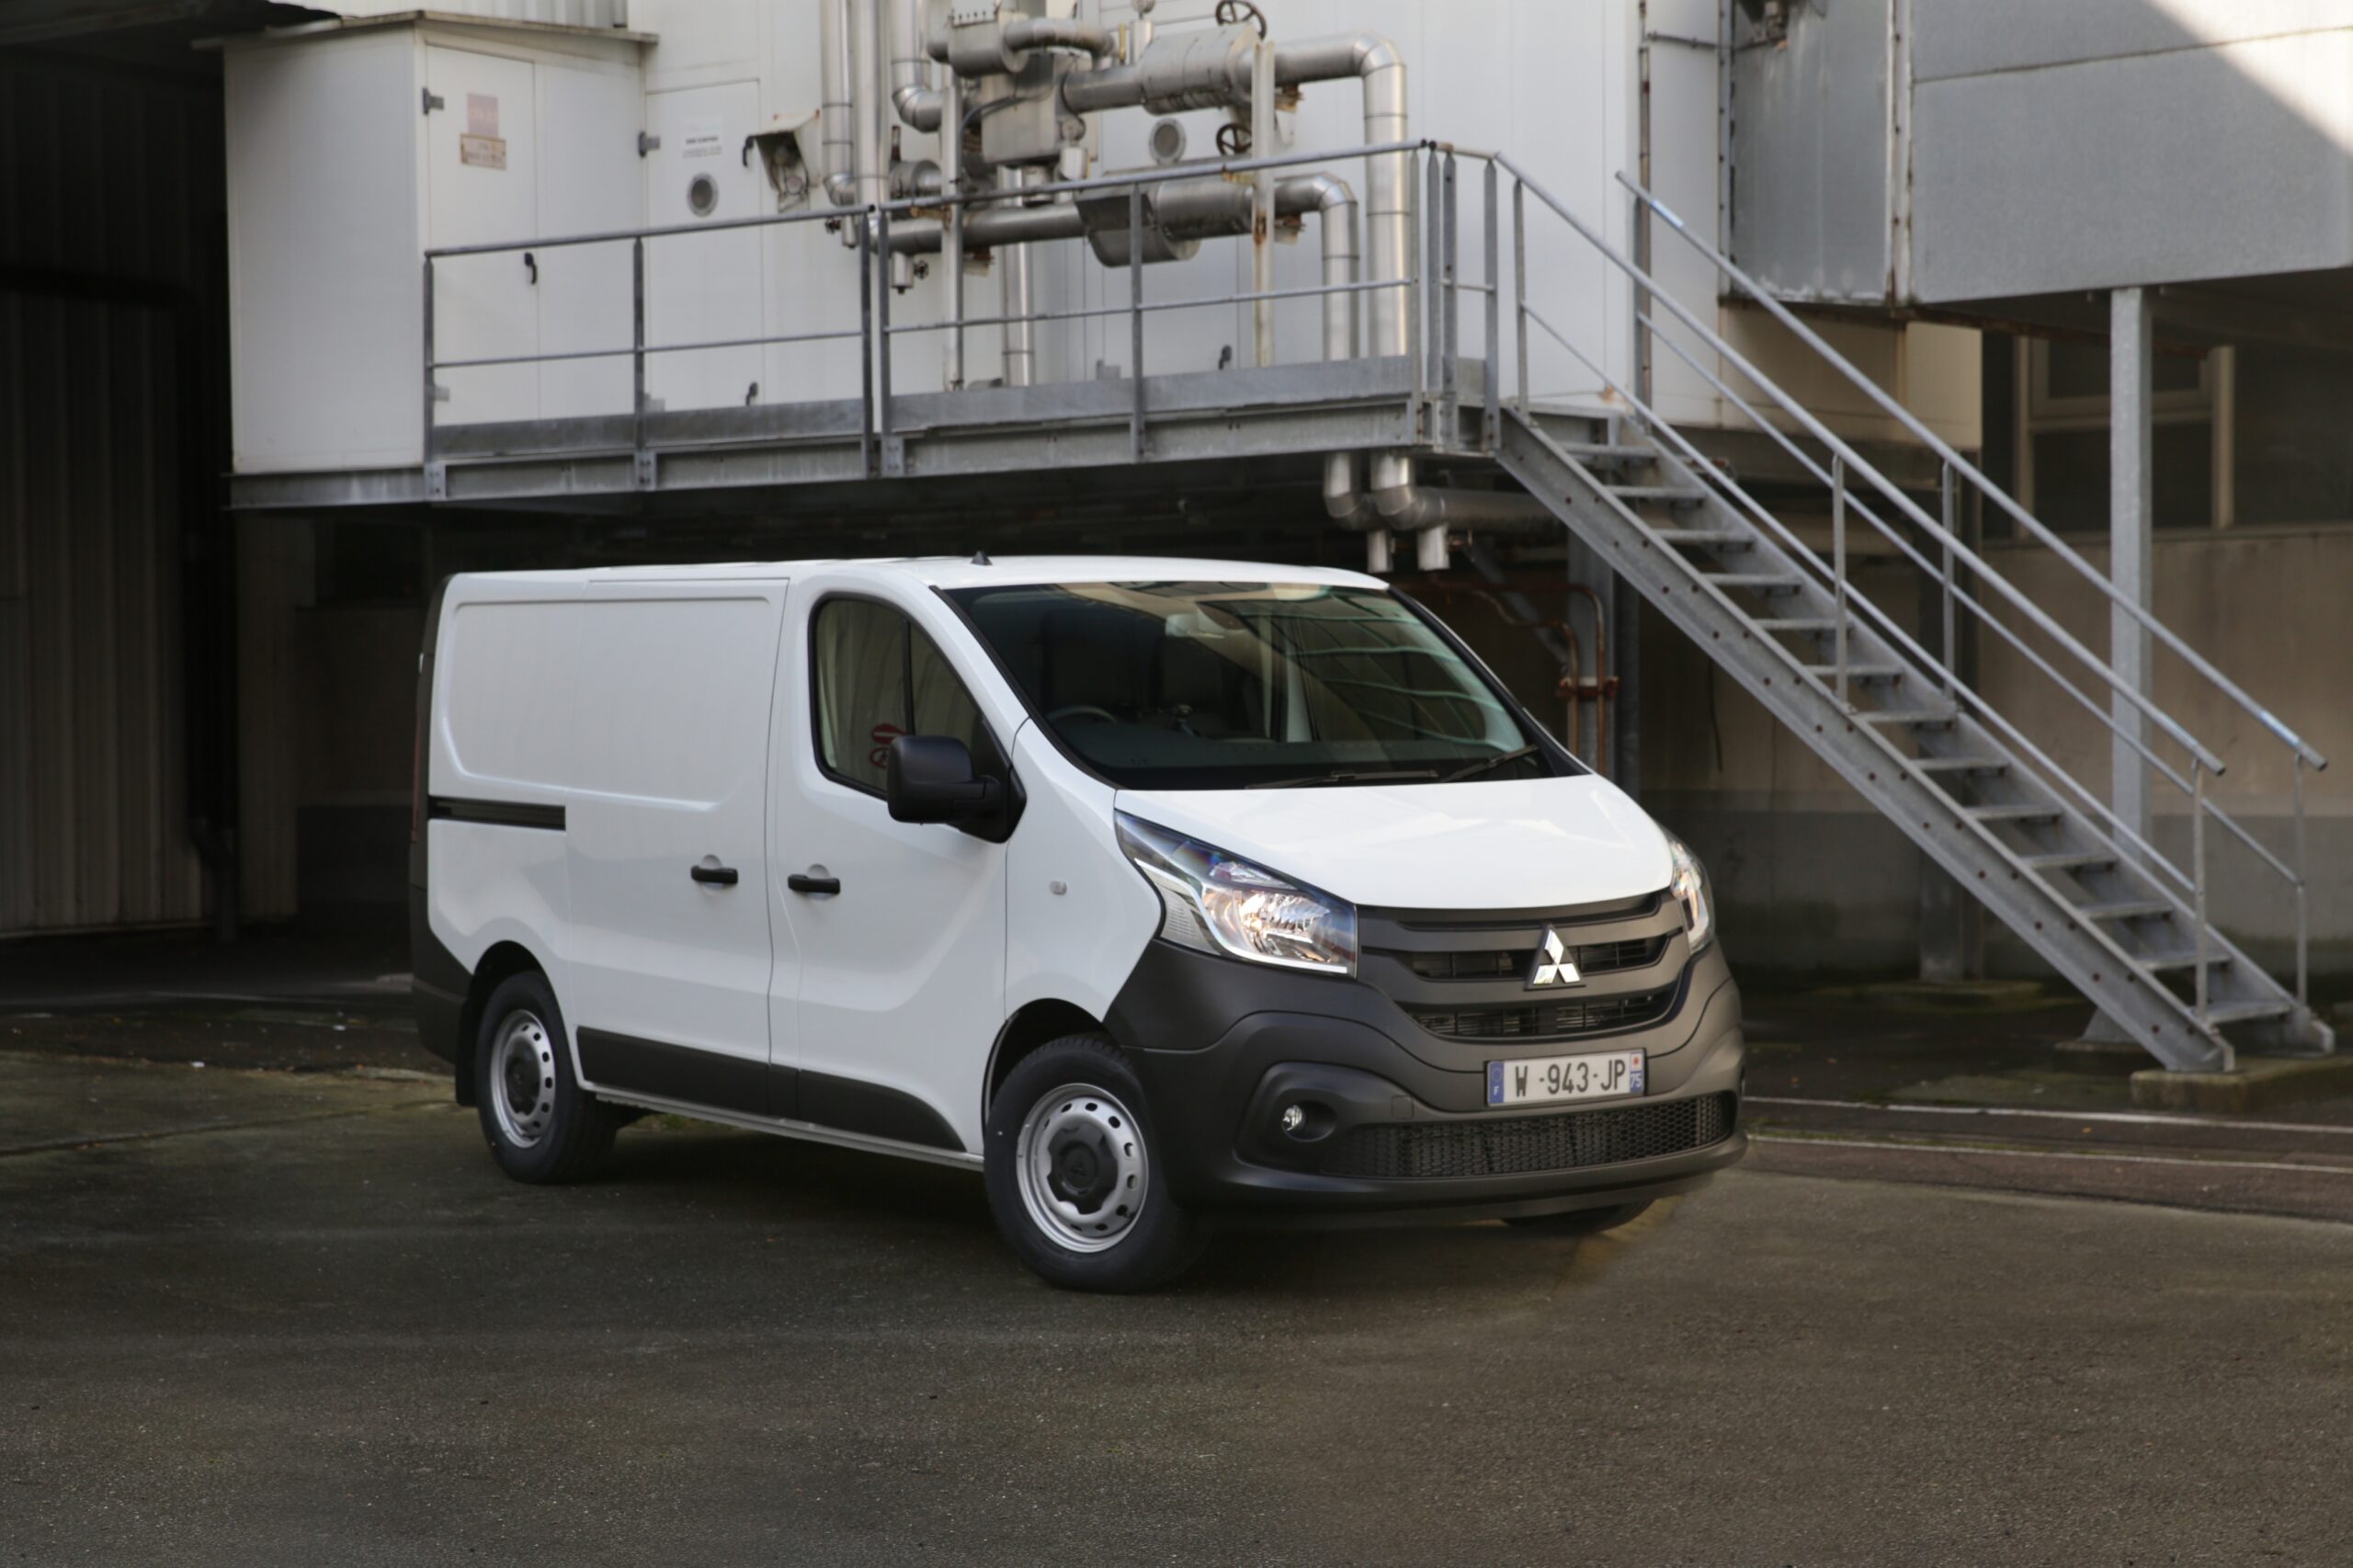 Mitsubishi release pricing for its Express model van